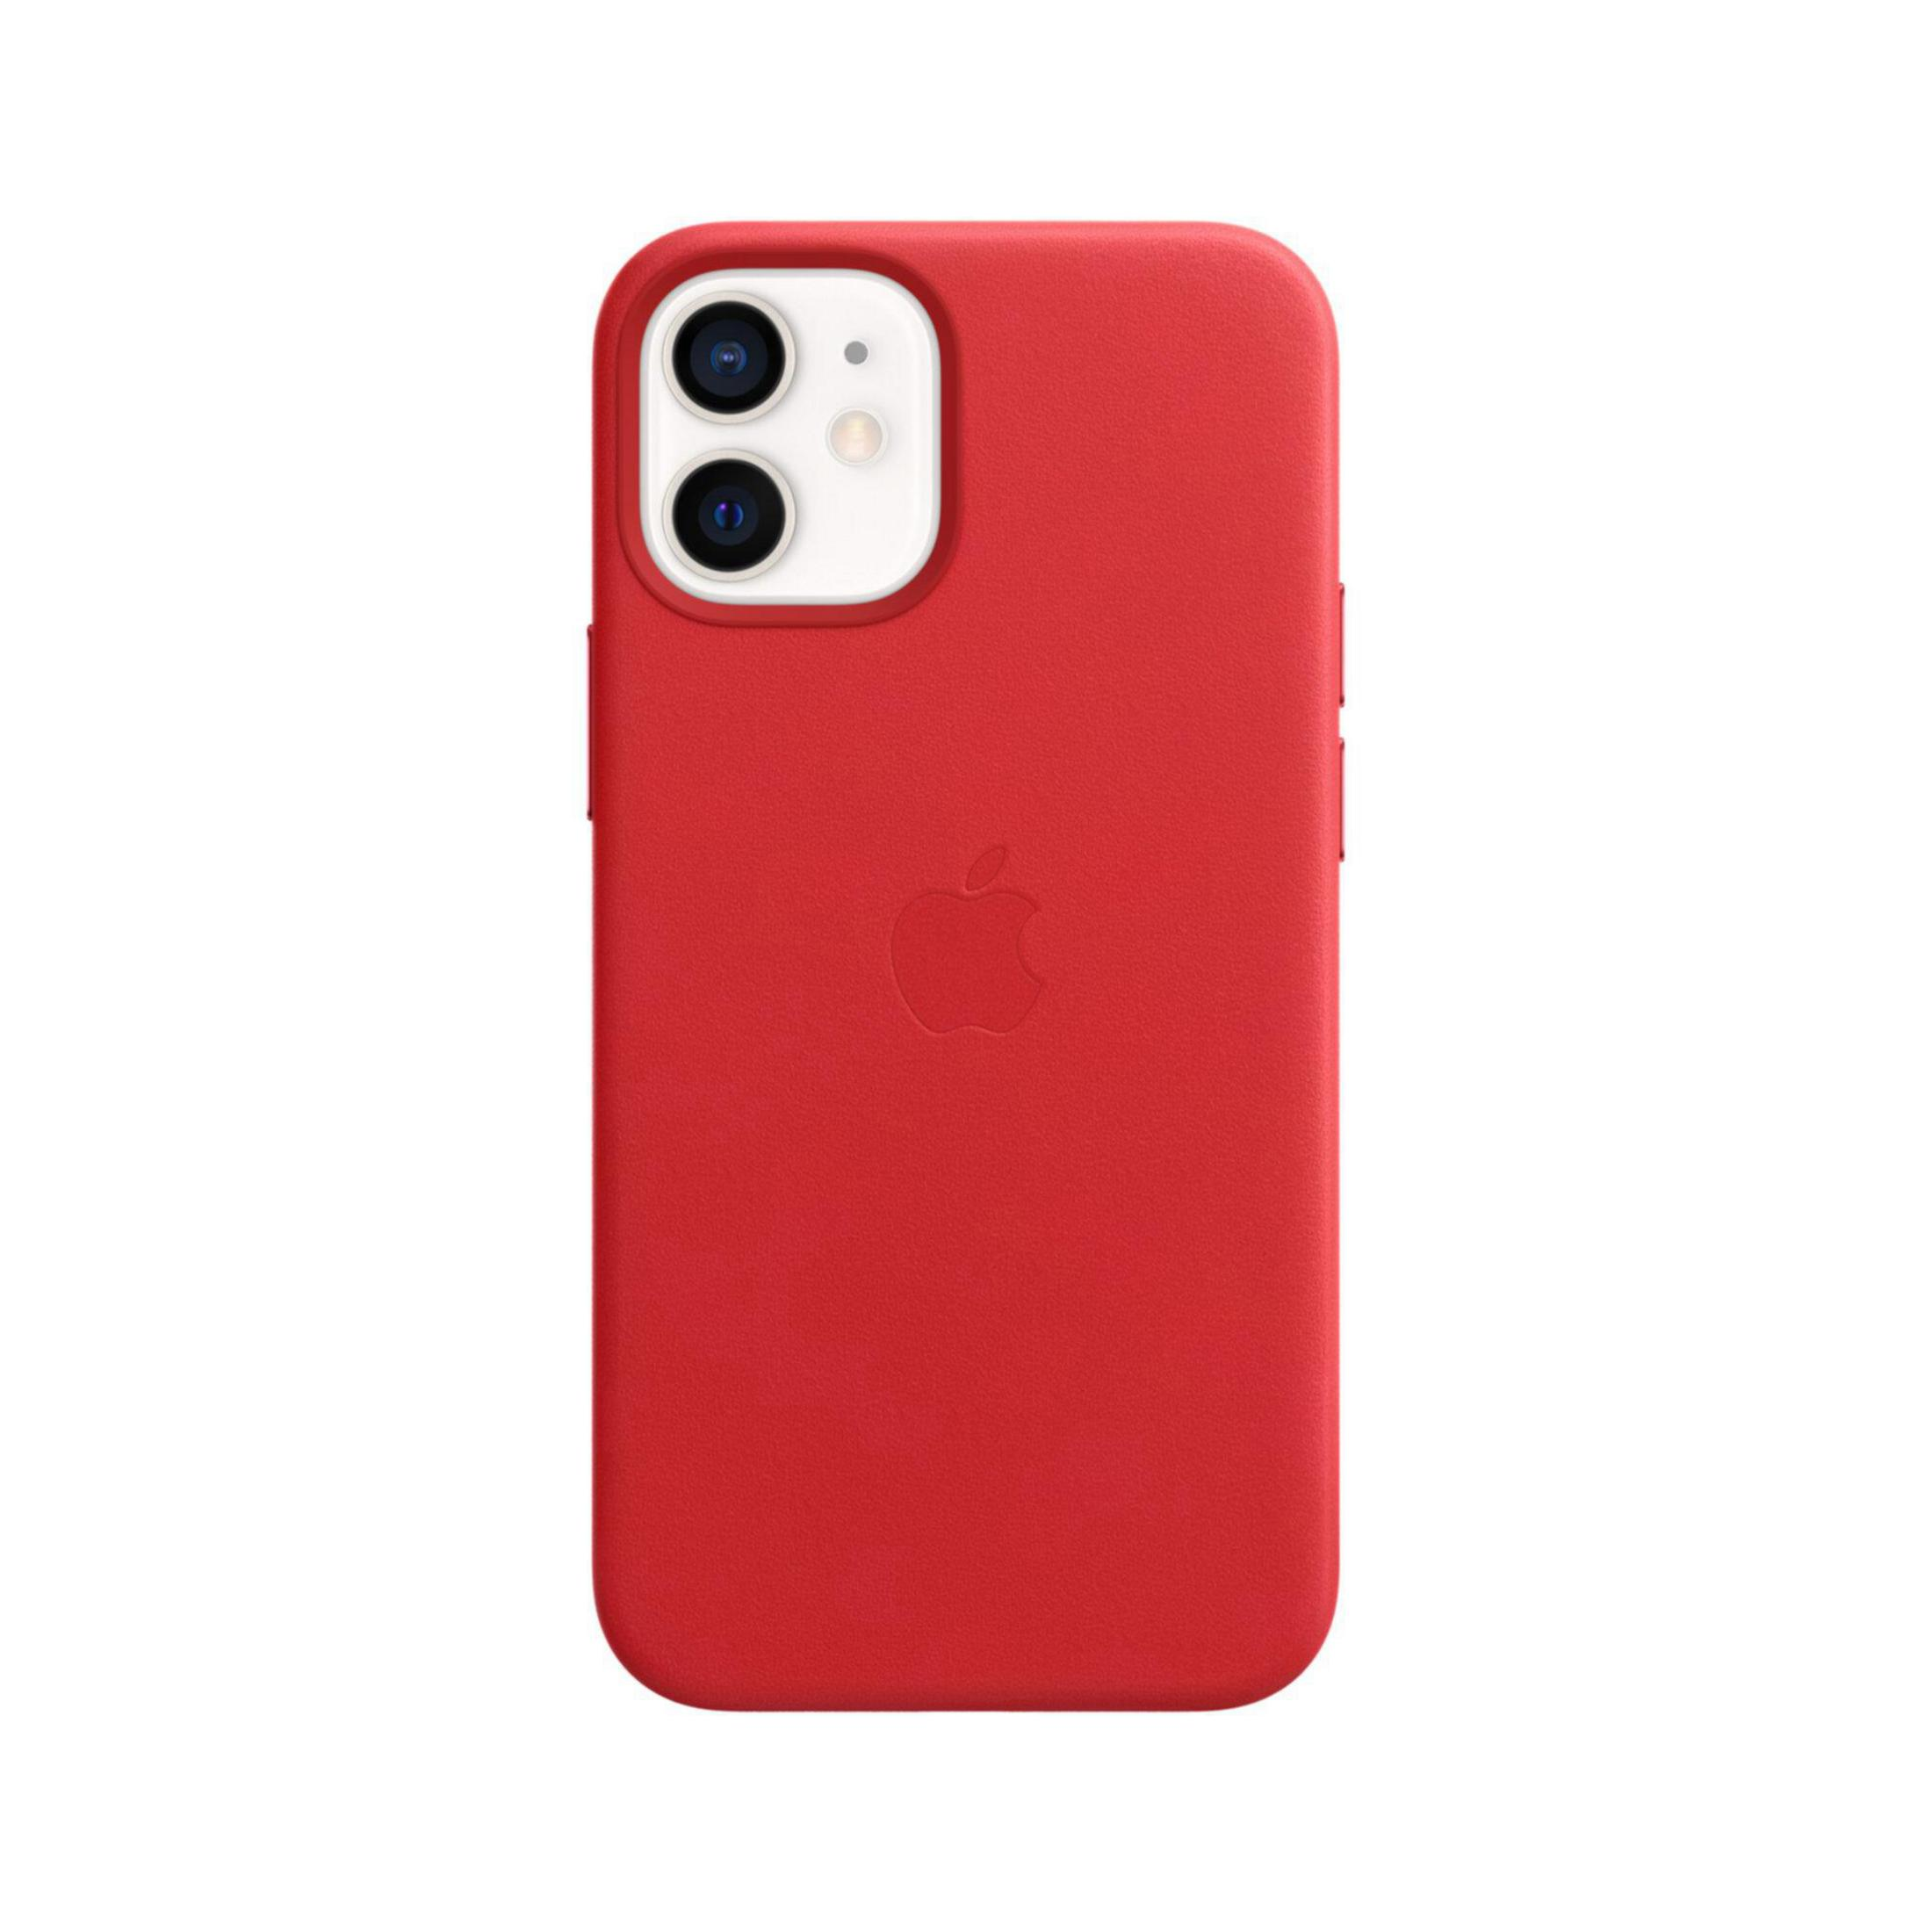 IPHONE12MLEDER-(PRODUCT)RED, Mini, IPhone MHK73ZM/A Apple, Red 12 APPLE Backcover,